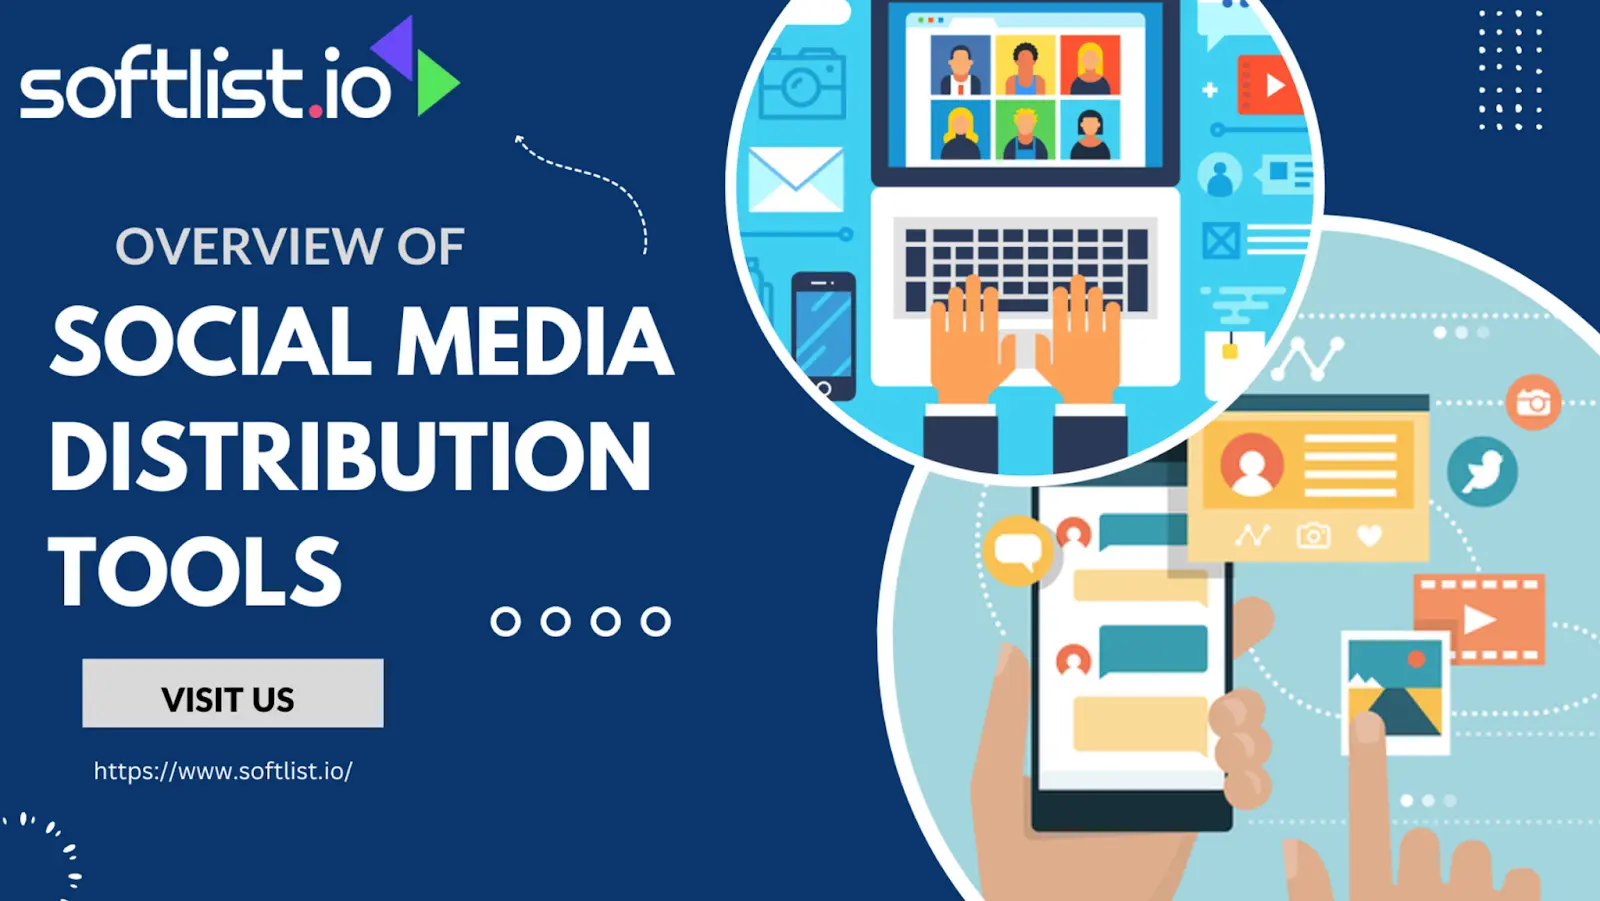 Essential Guide to Utilizing Social Media Distribution Tools